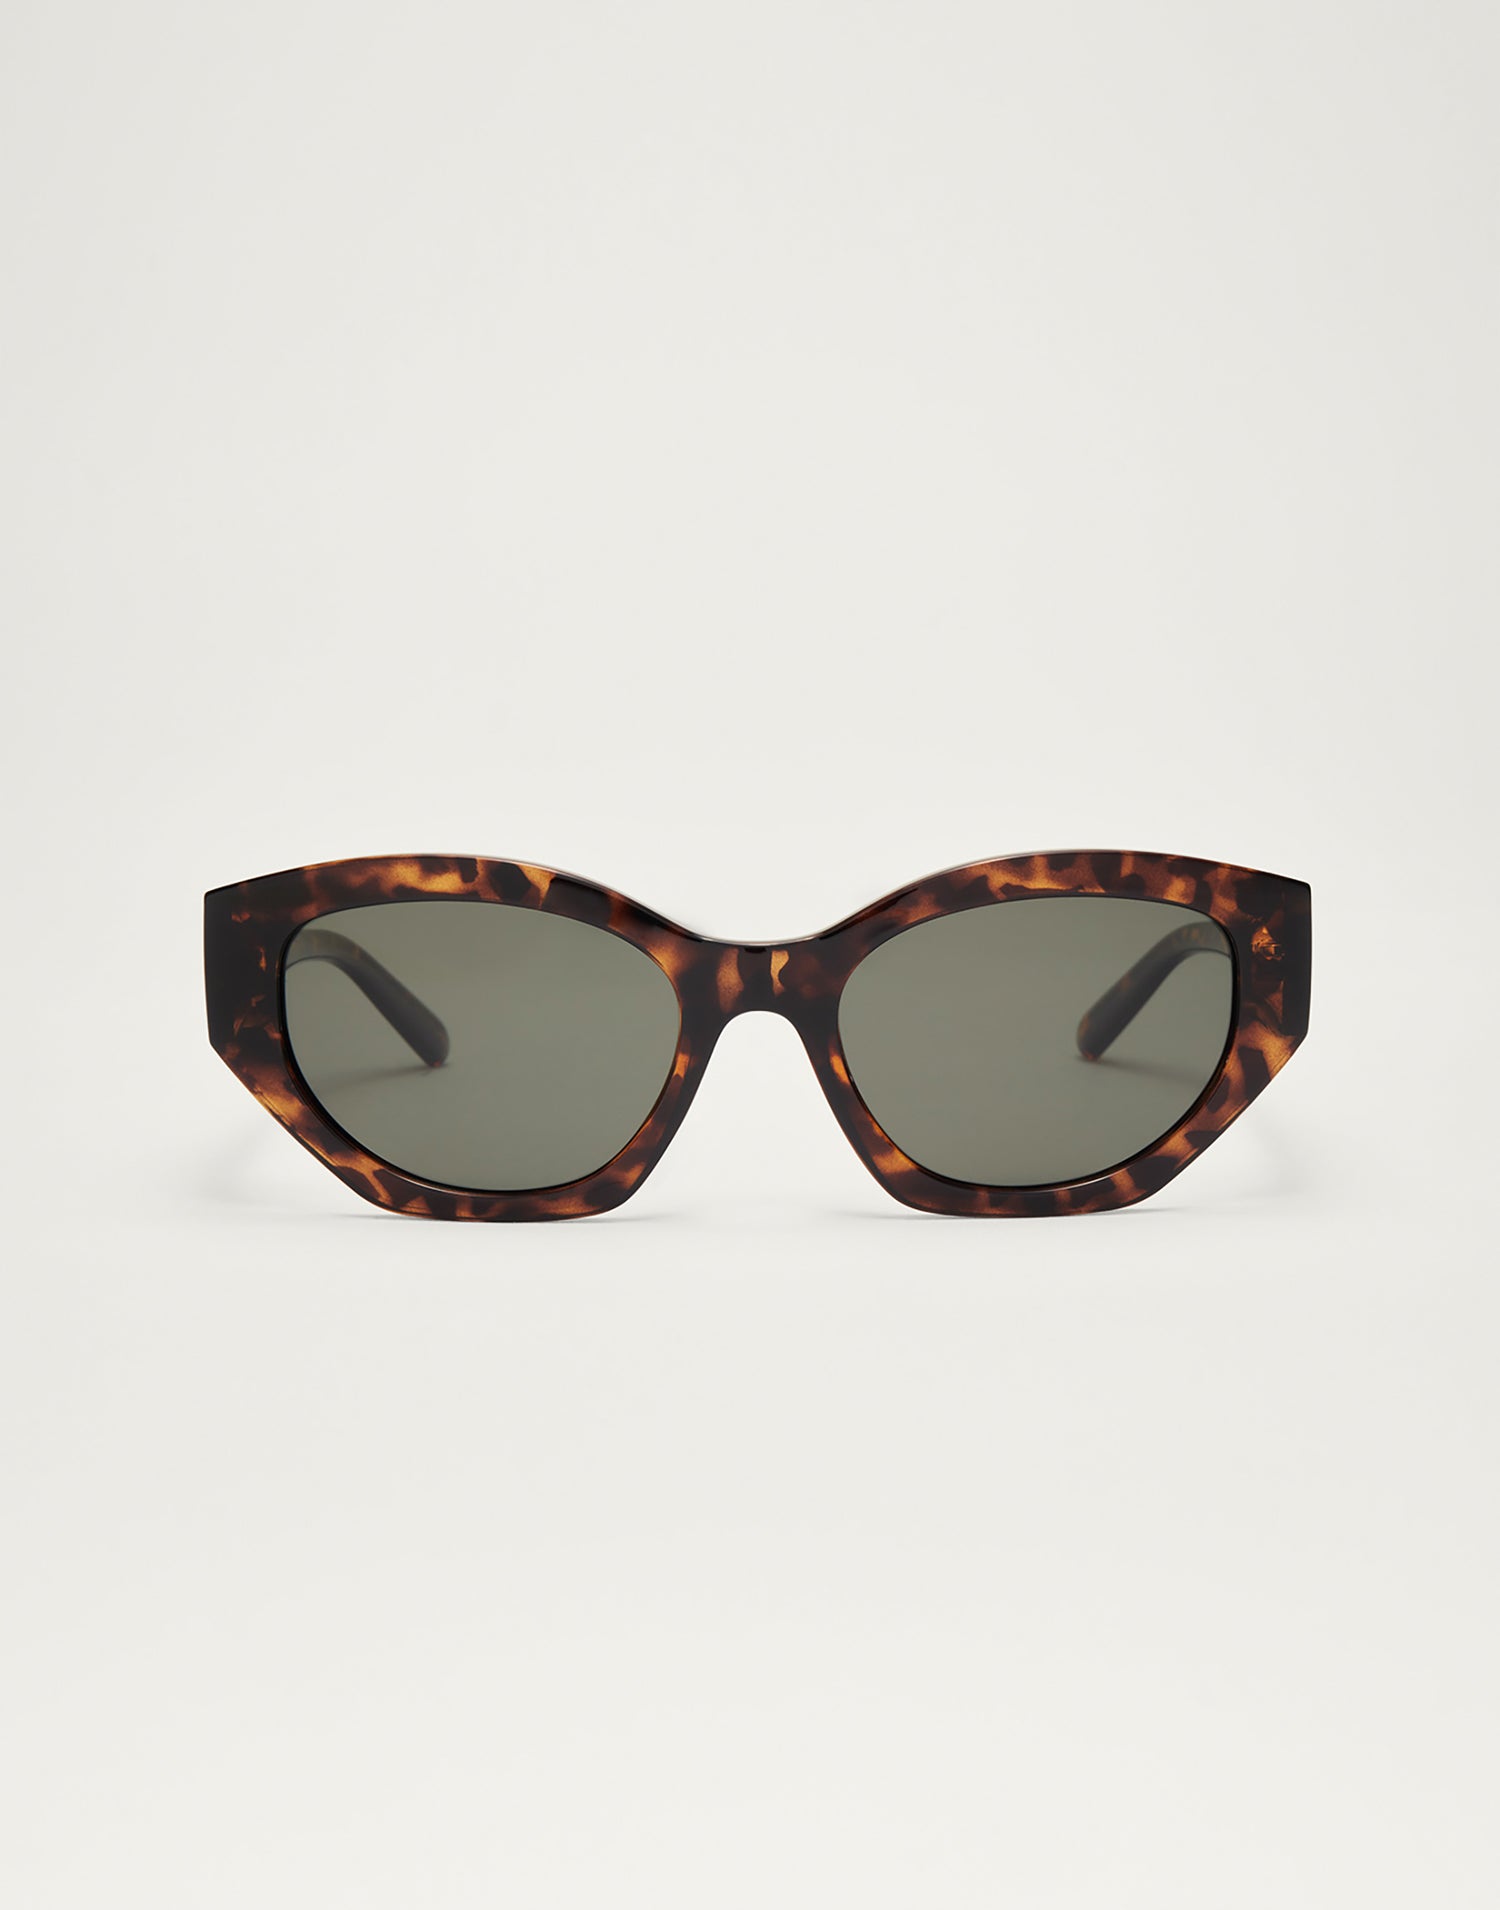 Love Sick Sunglasses by Z Supply in Dark Tort - Front View